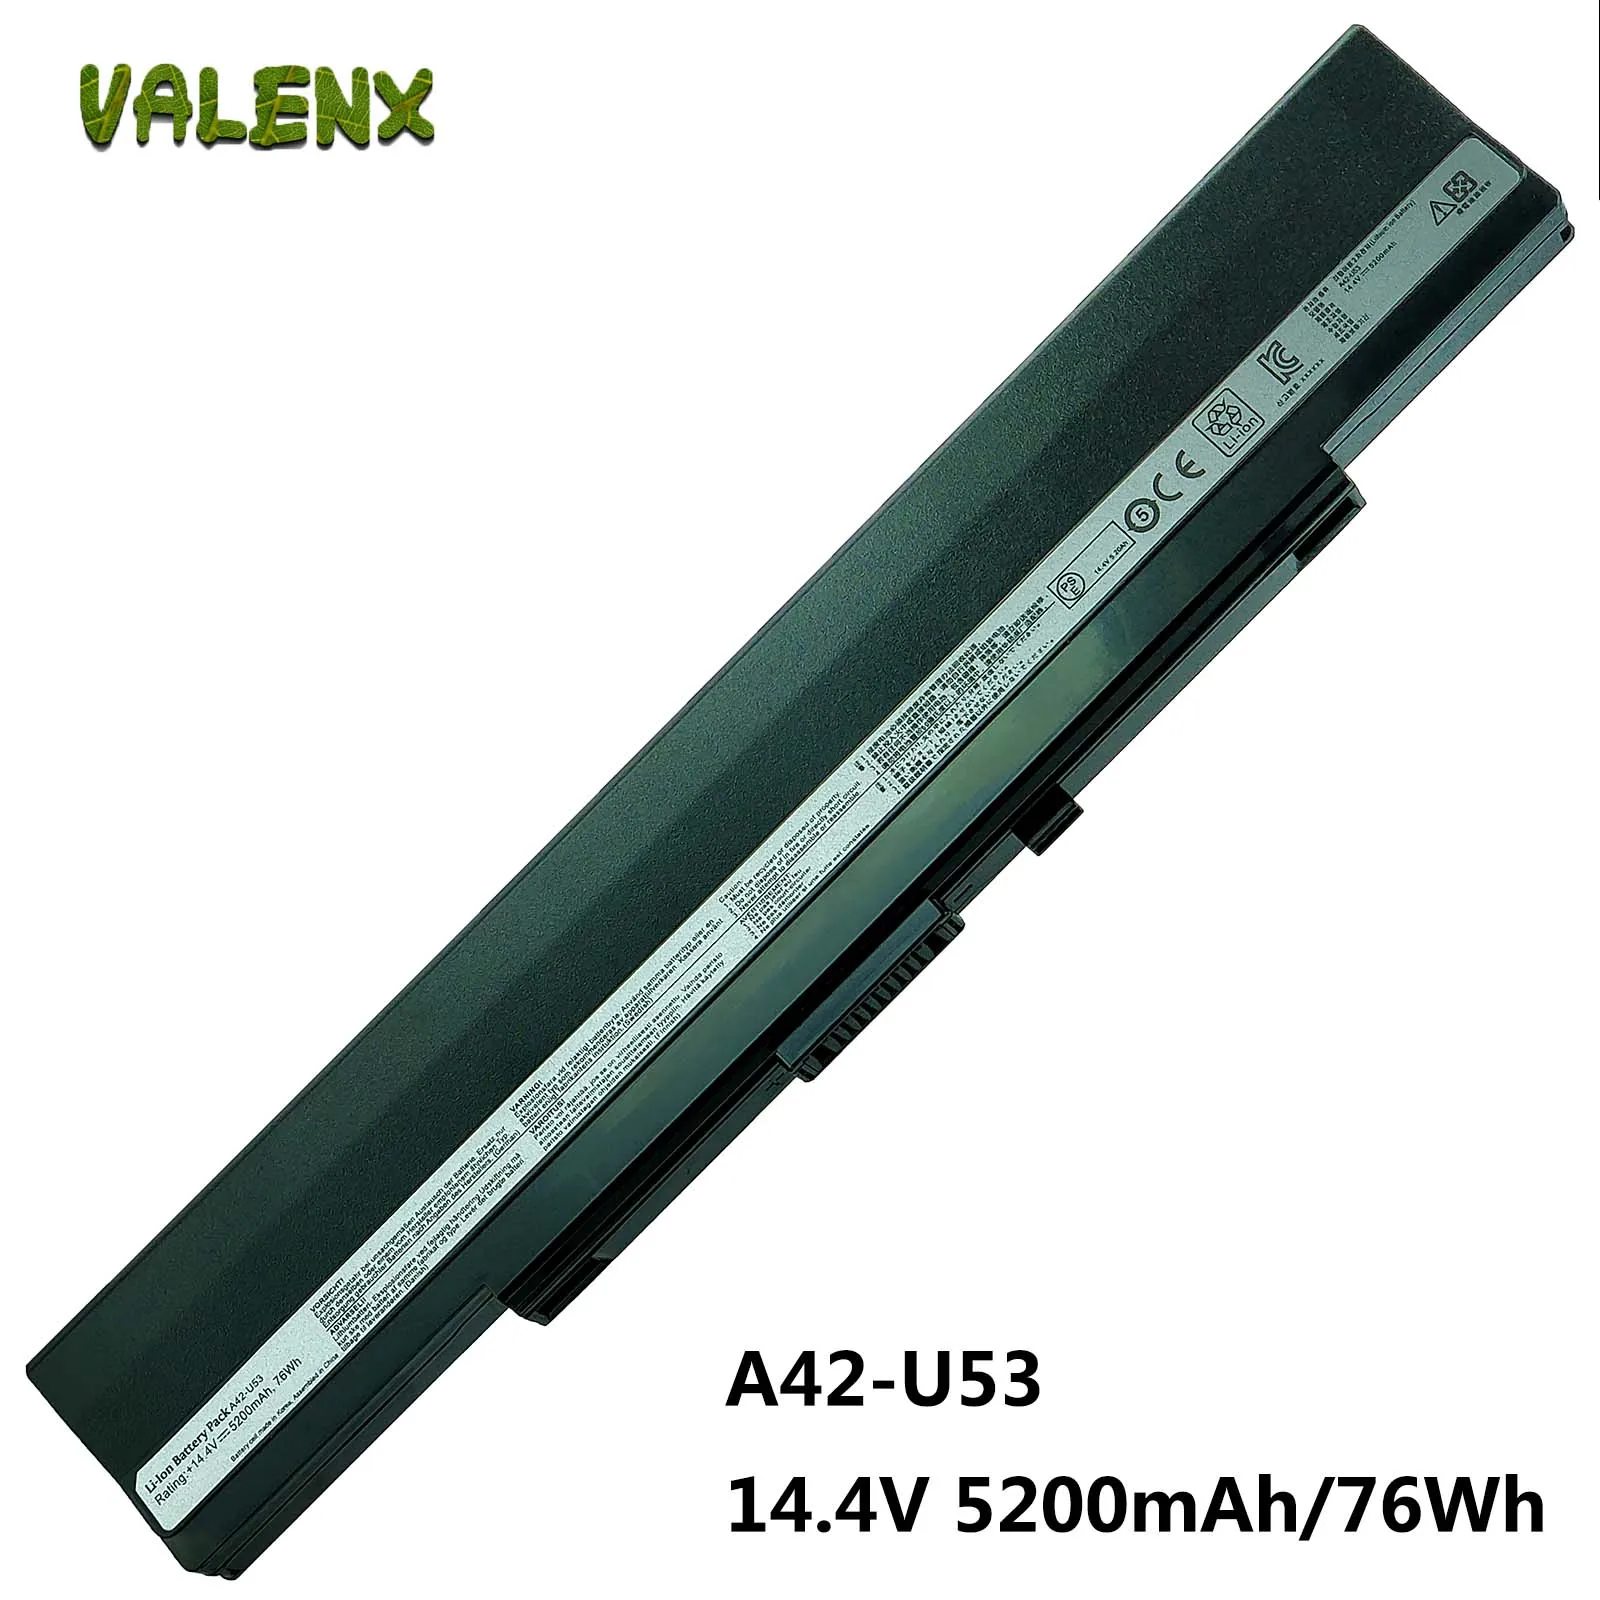 8cell 76WH/5200mAh laptop Battery for Asus A42-U53 A42-U43 U43F U33 U33J U42 U42F U42J U43 U43J U52 U52F U53 U53F U53J U53JC